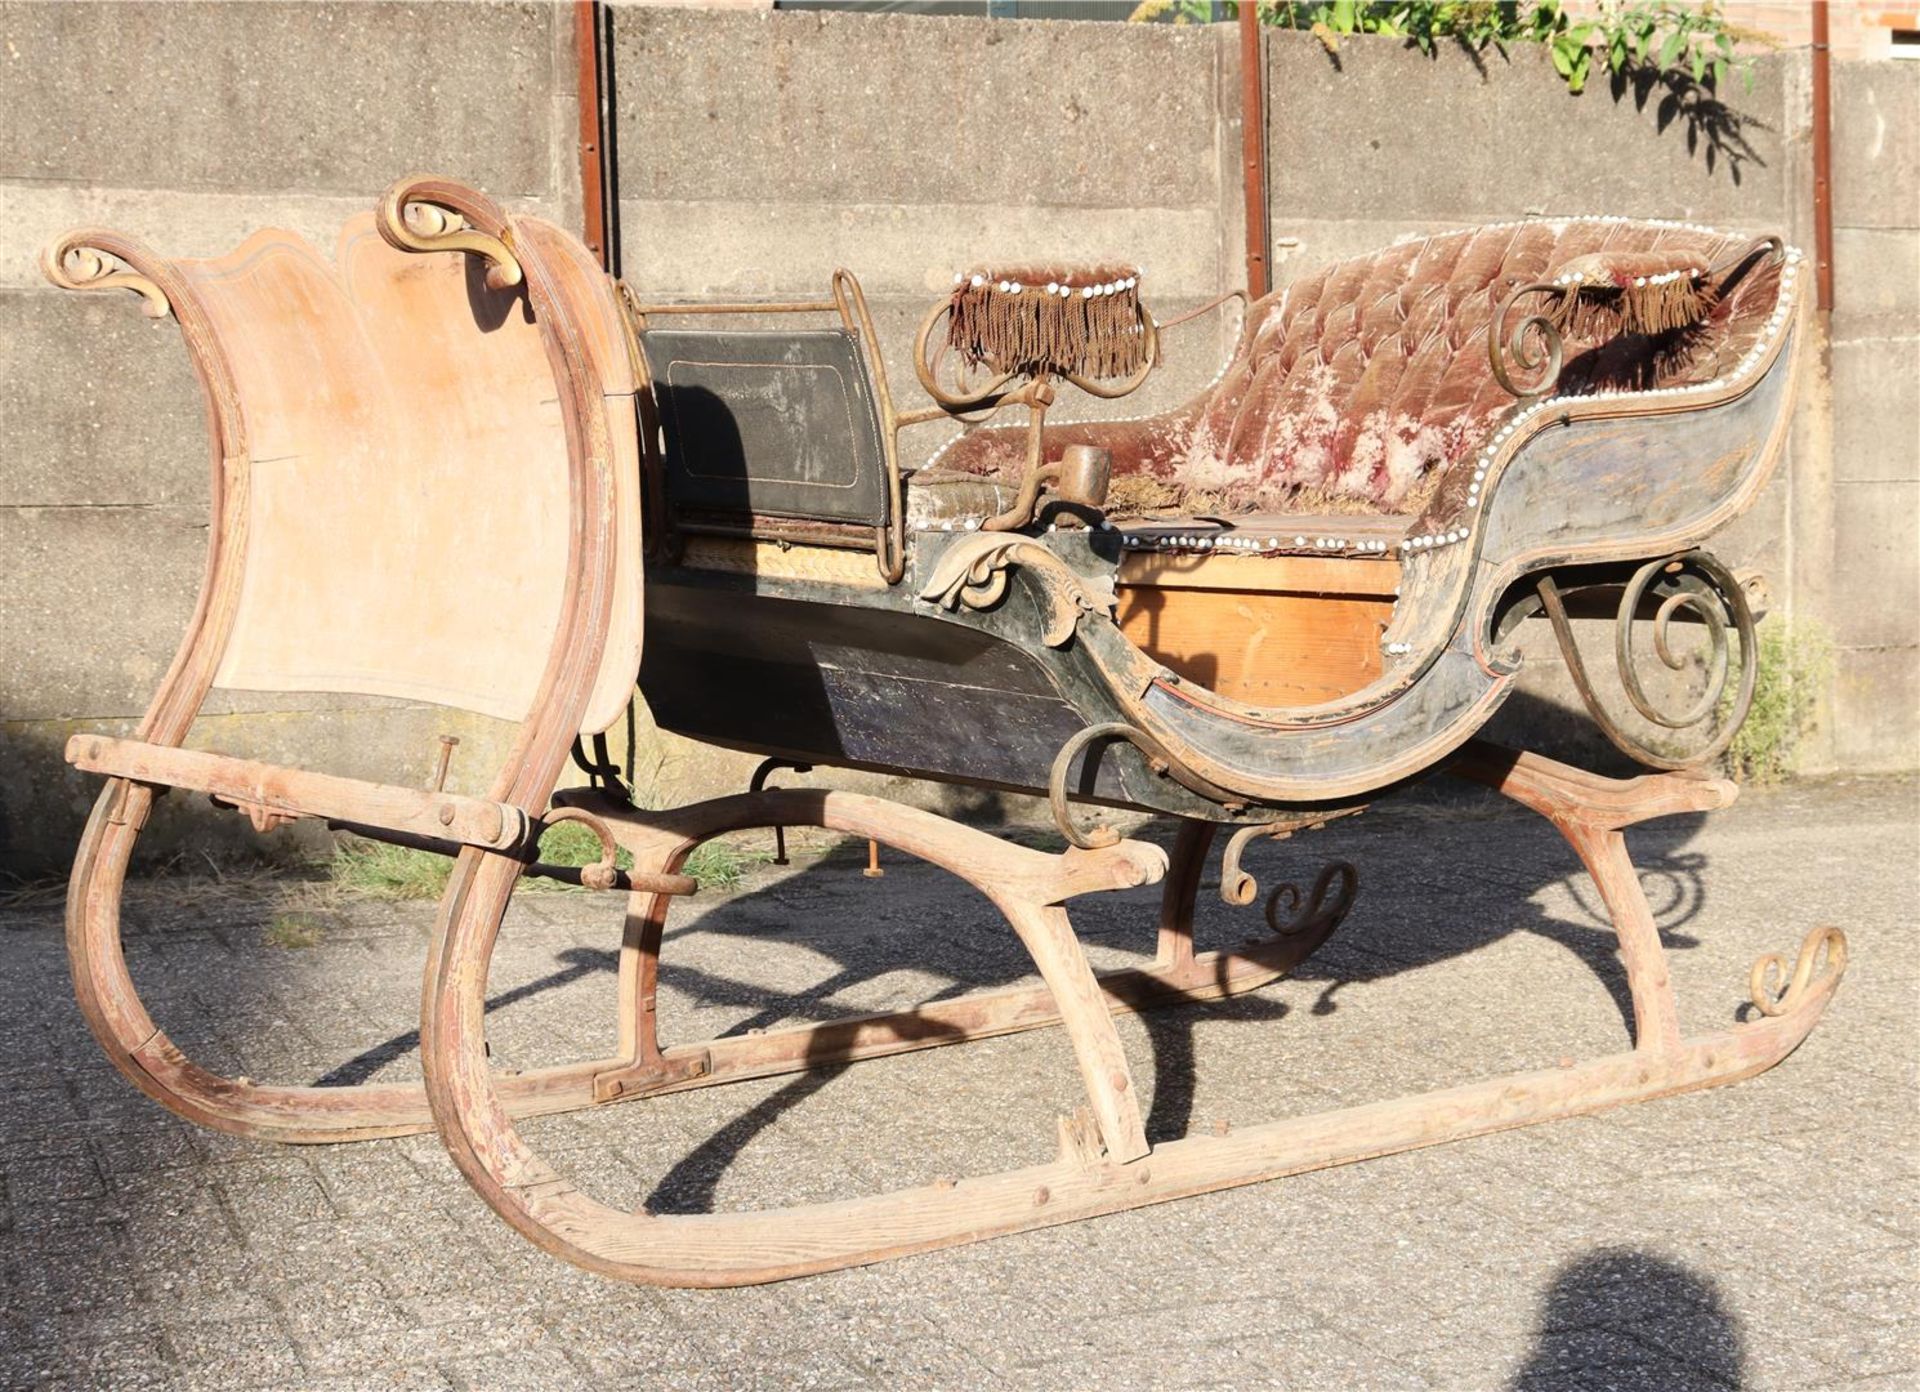 Old horse-drawn sleigh - Image 6 of 9